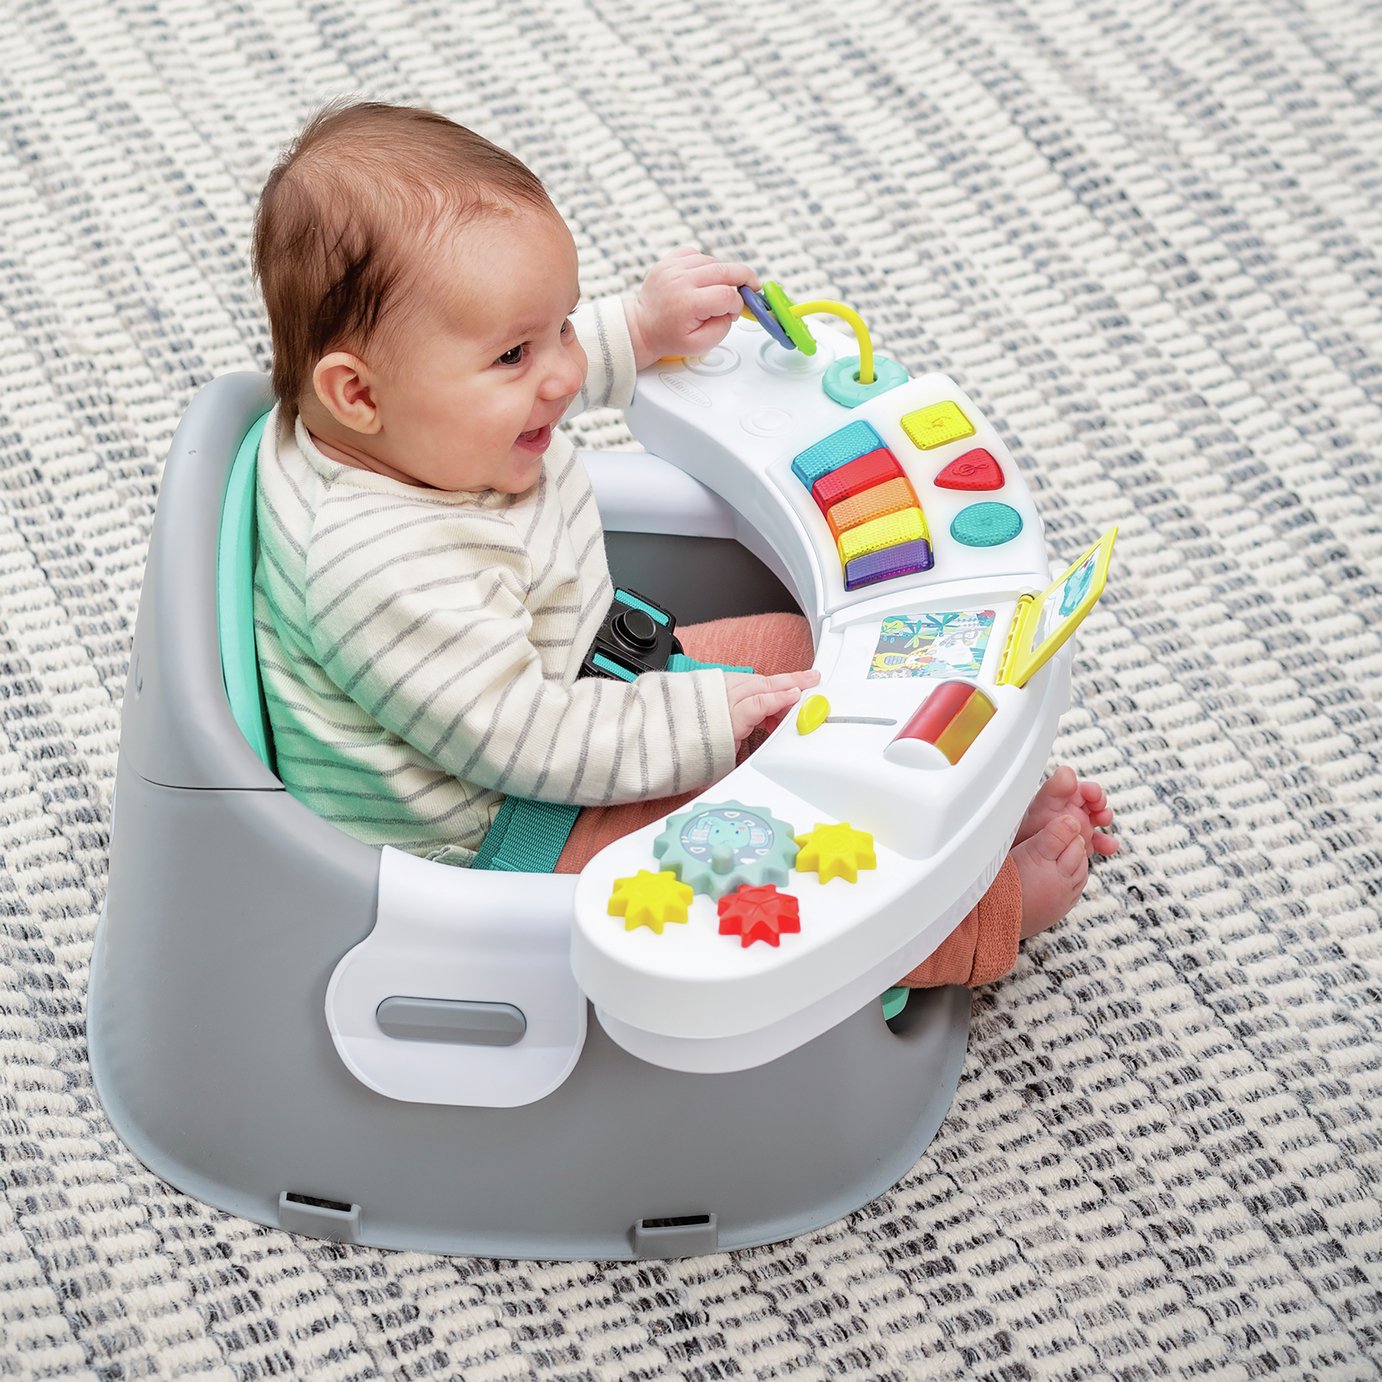 Infantino Music and Lights 3-in-1 Seat and Booster Review